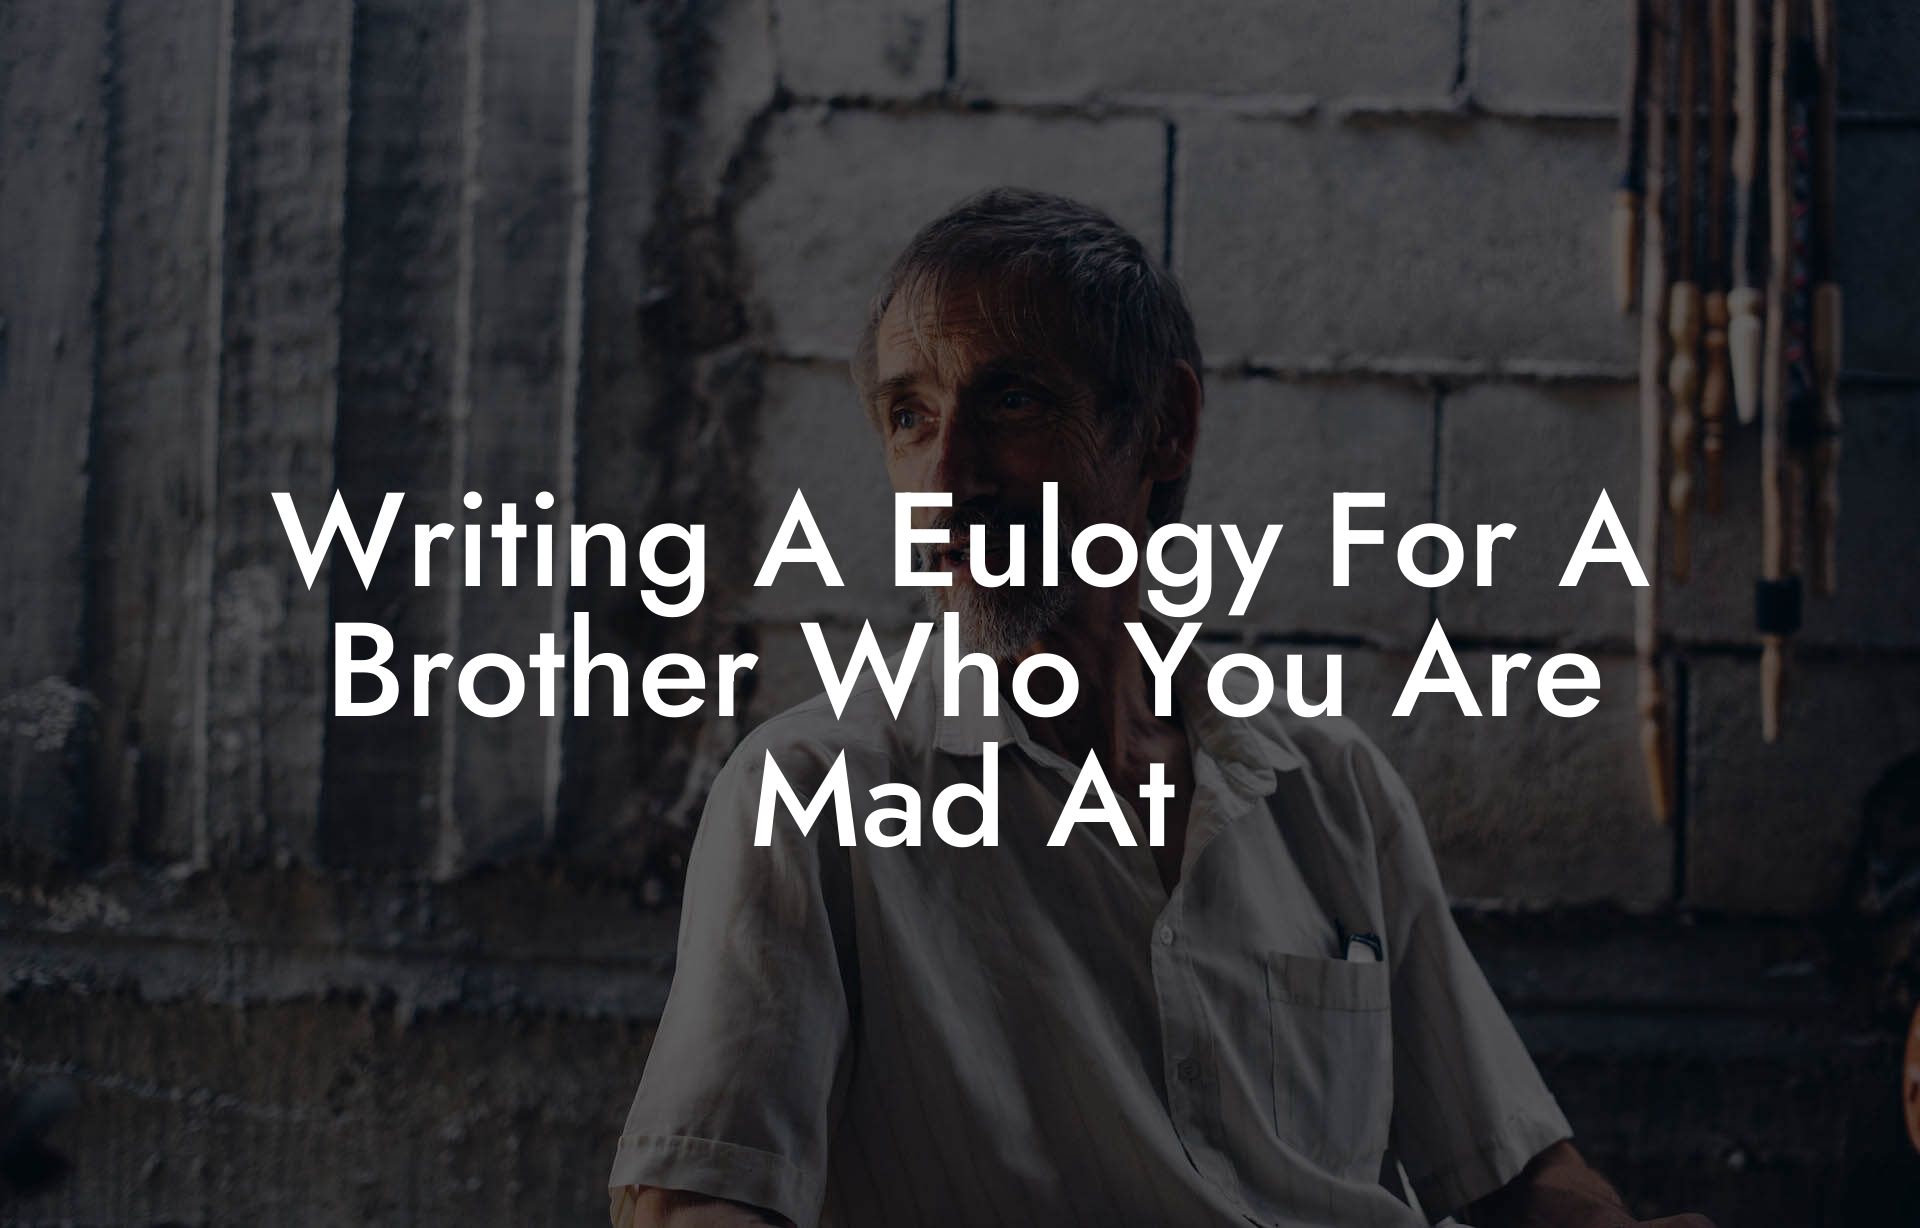 Writing A Eulogy For A Brother Who You Are Mad At